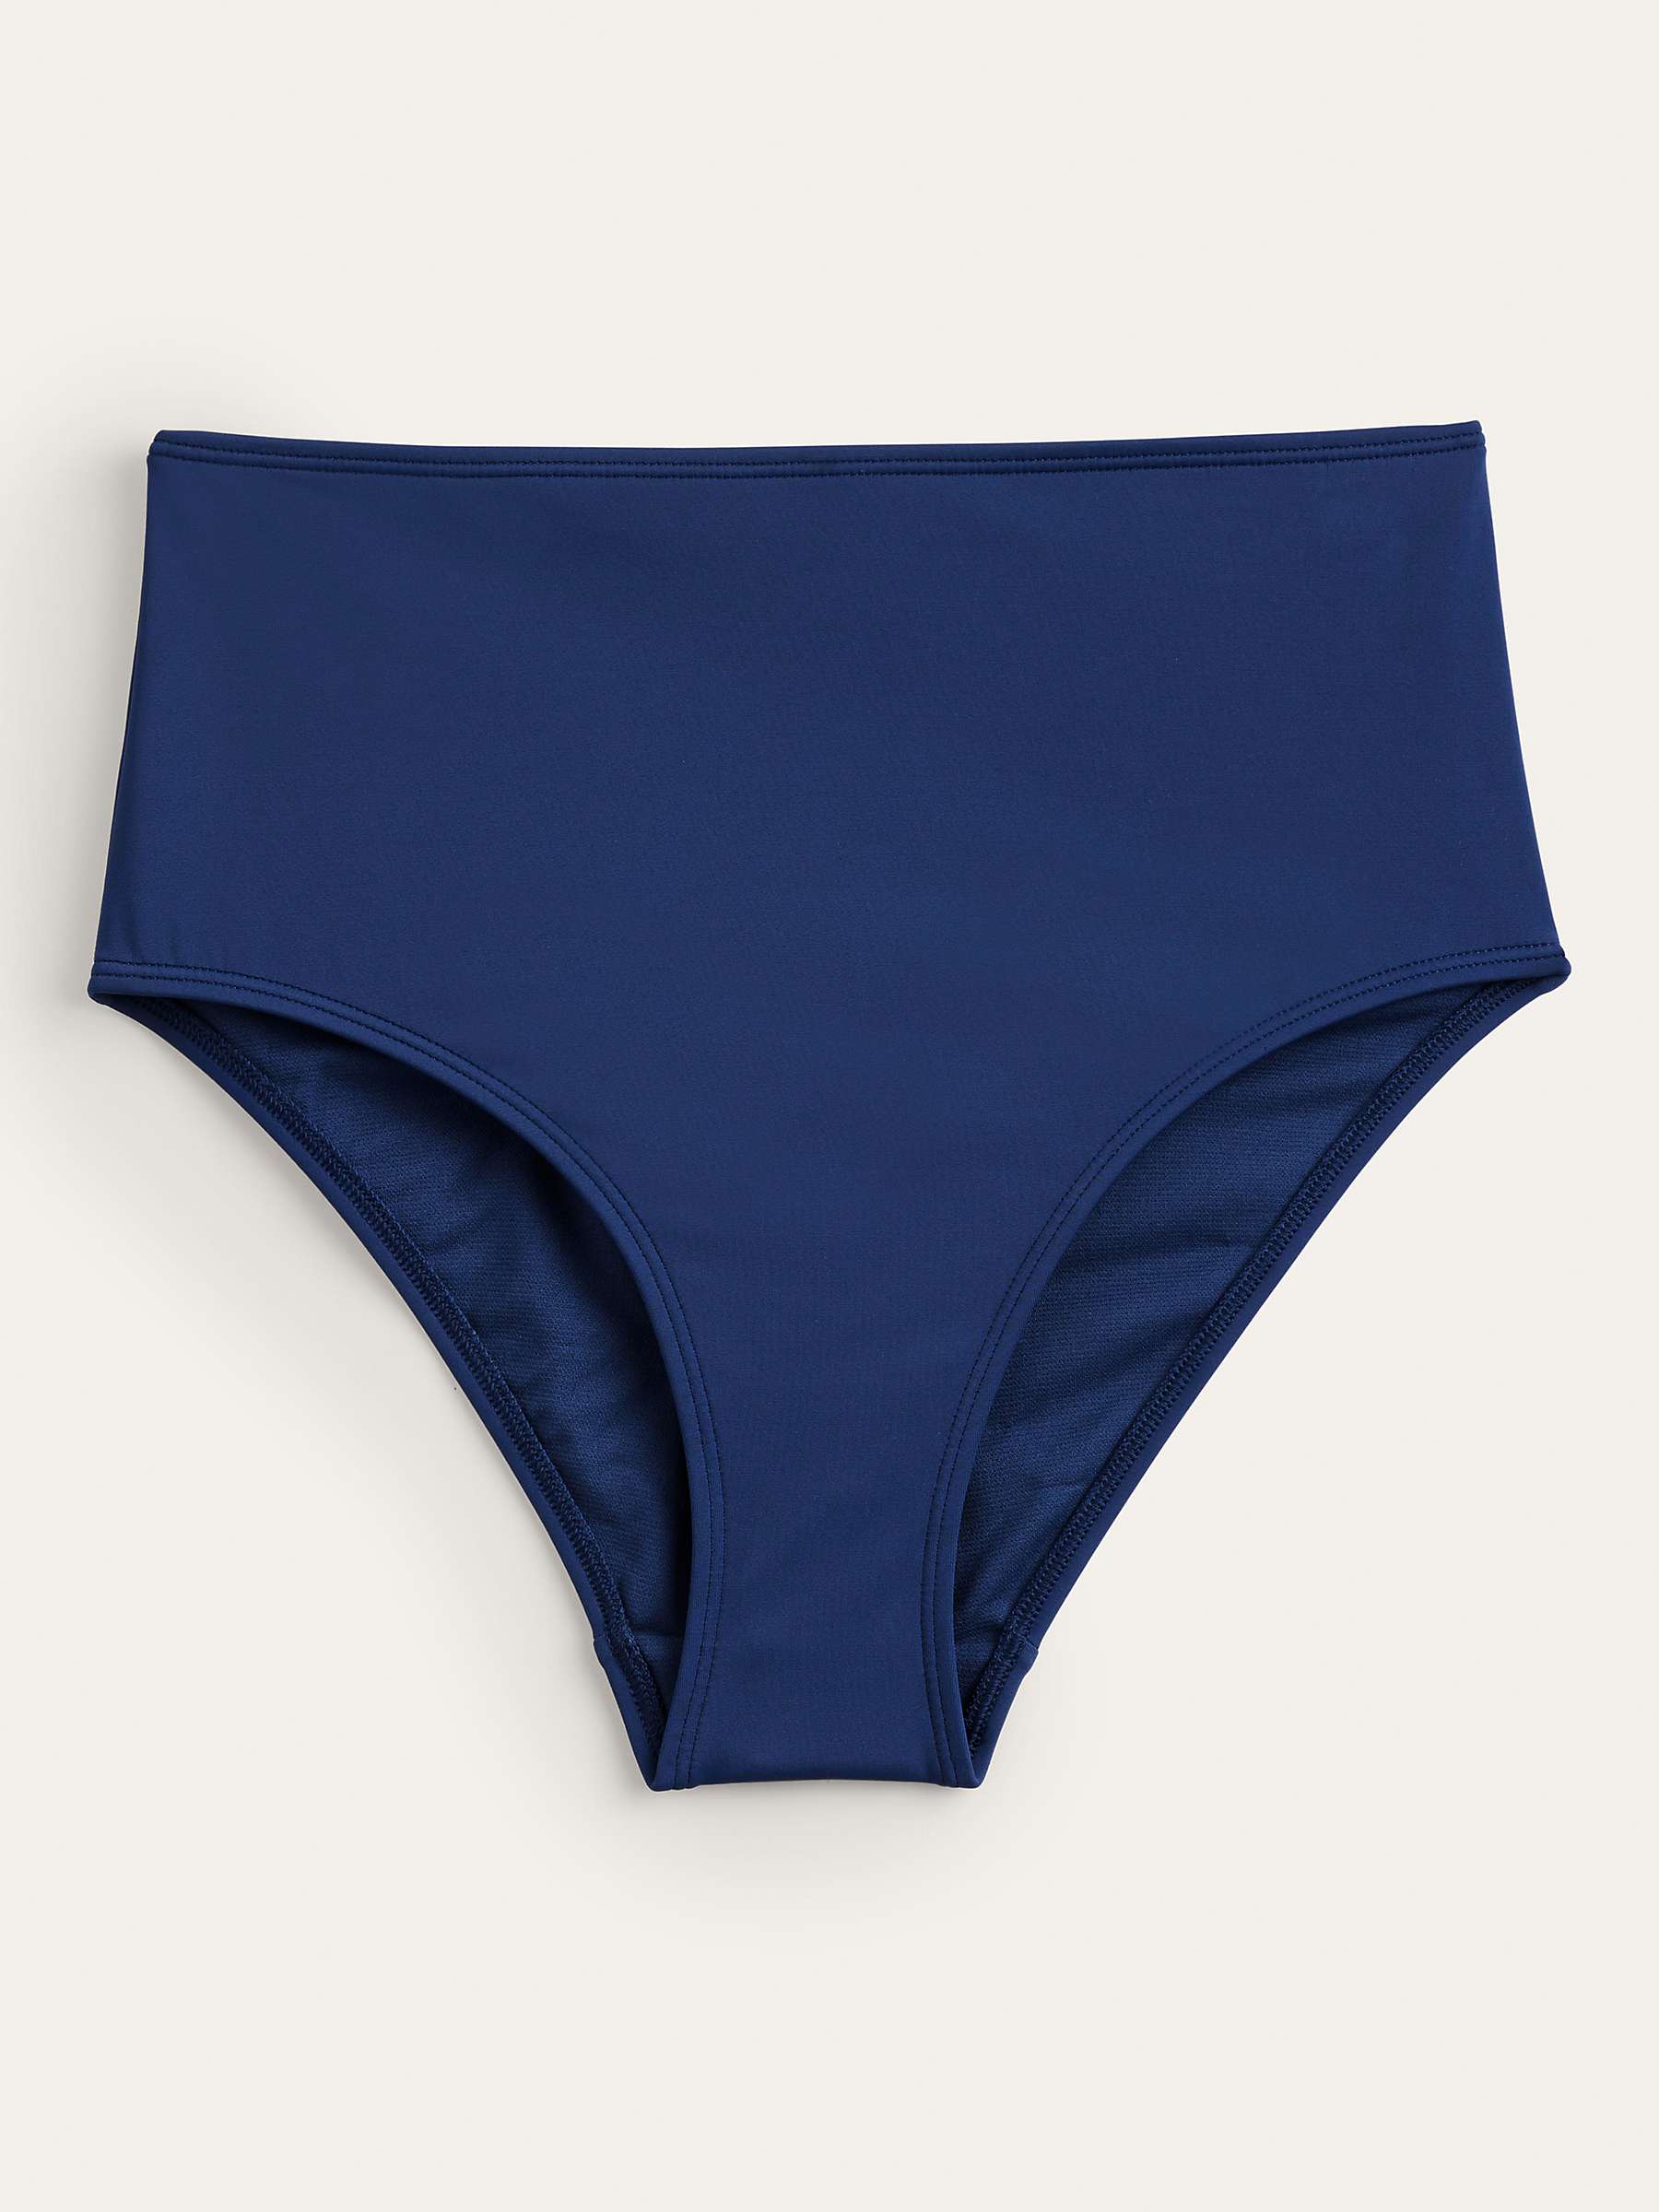 Buy Boden High Waisted Bikini Bottoms, French Navy Online at johnlewis.com